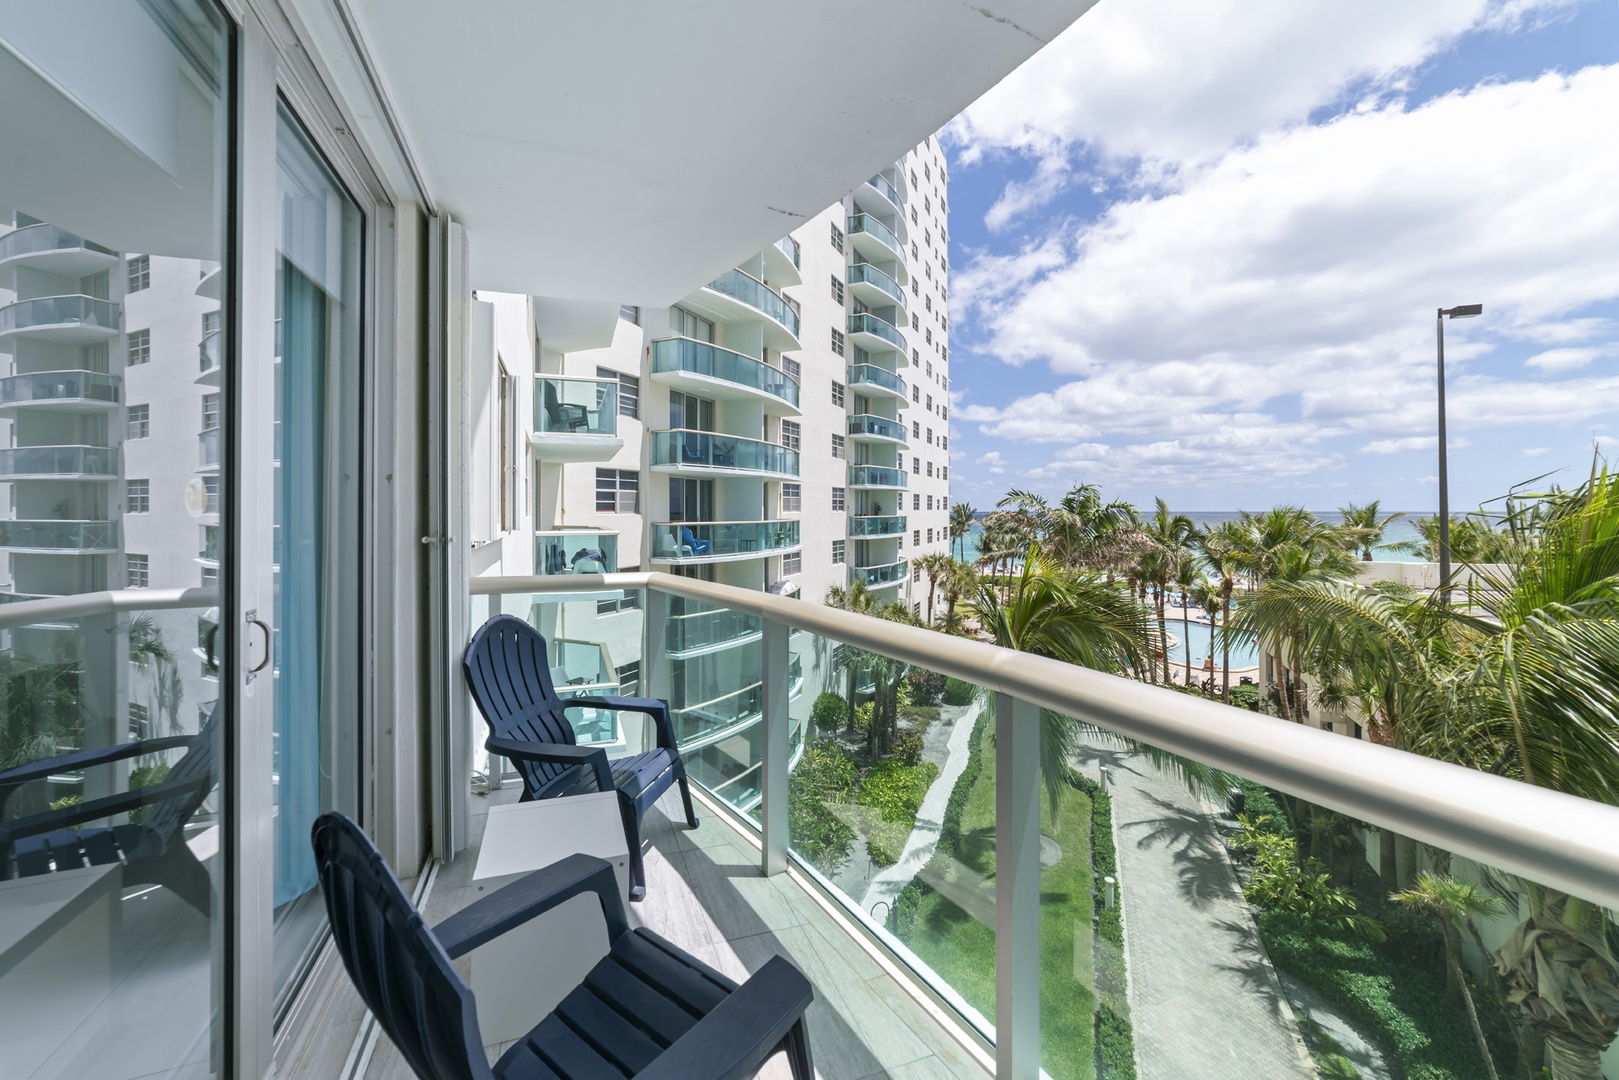 Breathe in the fresh air and soak up the views from the balcony